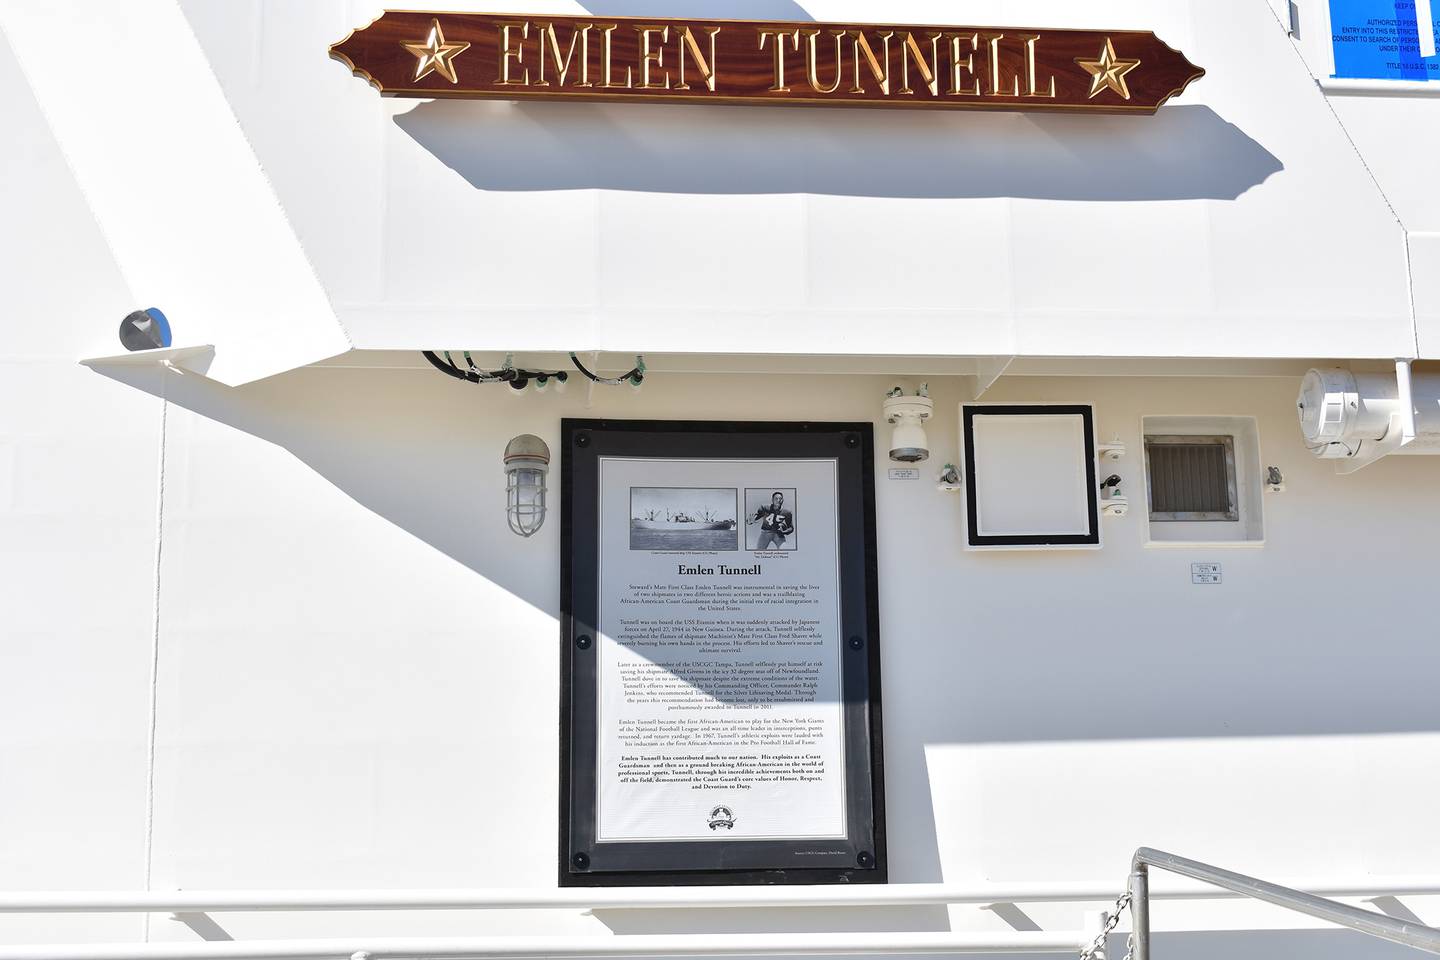 This undated photo provided by the United States Coast Guard shows a name plate and tribute plaque for Emlen Tunnell on a U.S. Coast Guard cutter docked in Bollinger Shipyard, Lockport, La.